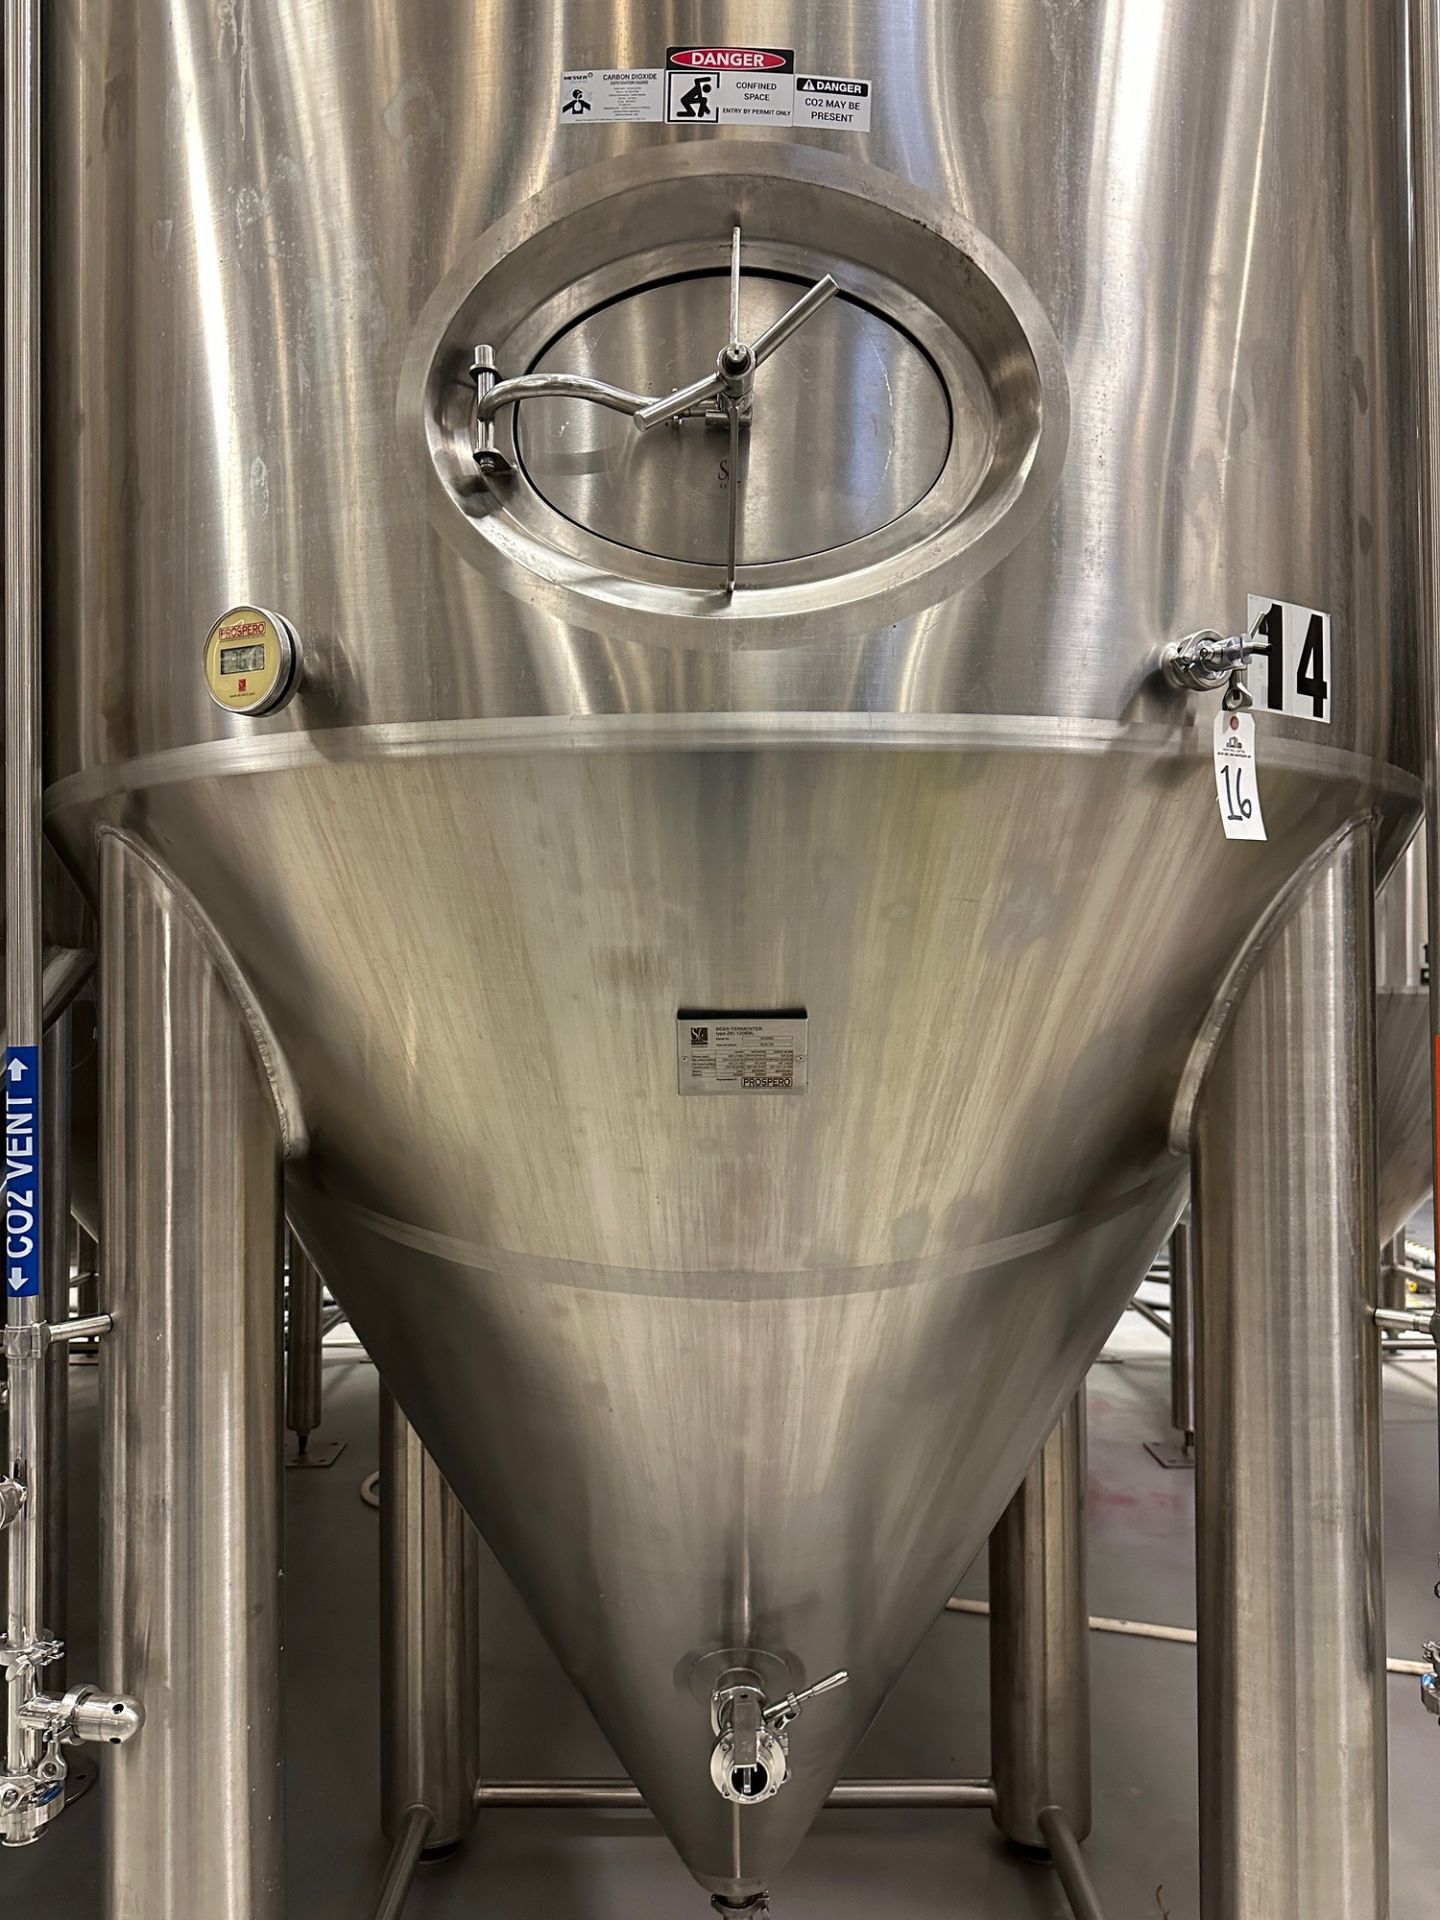 (1 of 8) 2020 Marks 132 BBL FV / 175 BBL or 5400 Gal Max Capacity Fermentation Tank | Rig Fee $2620 - Image 2 of 5